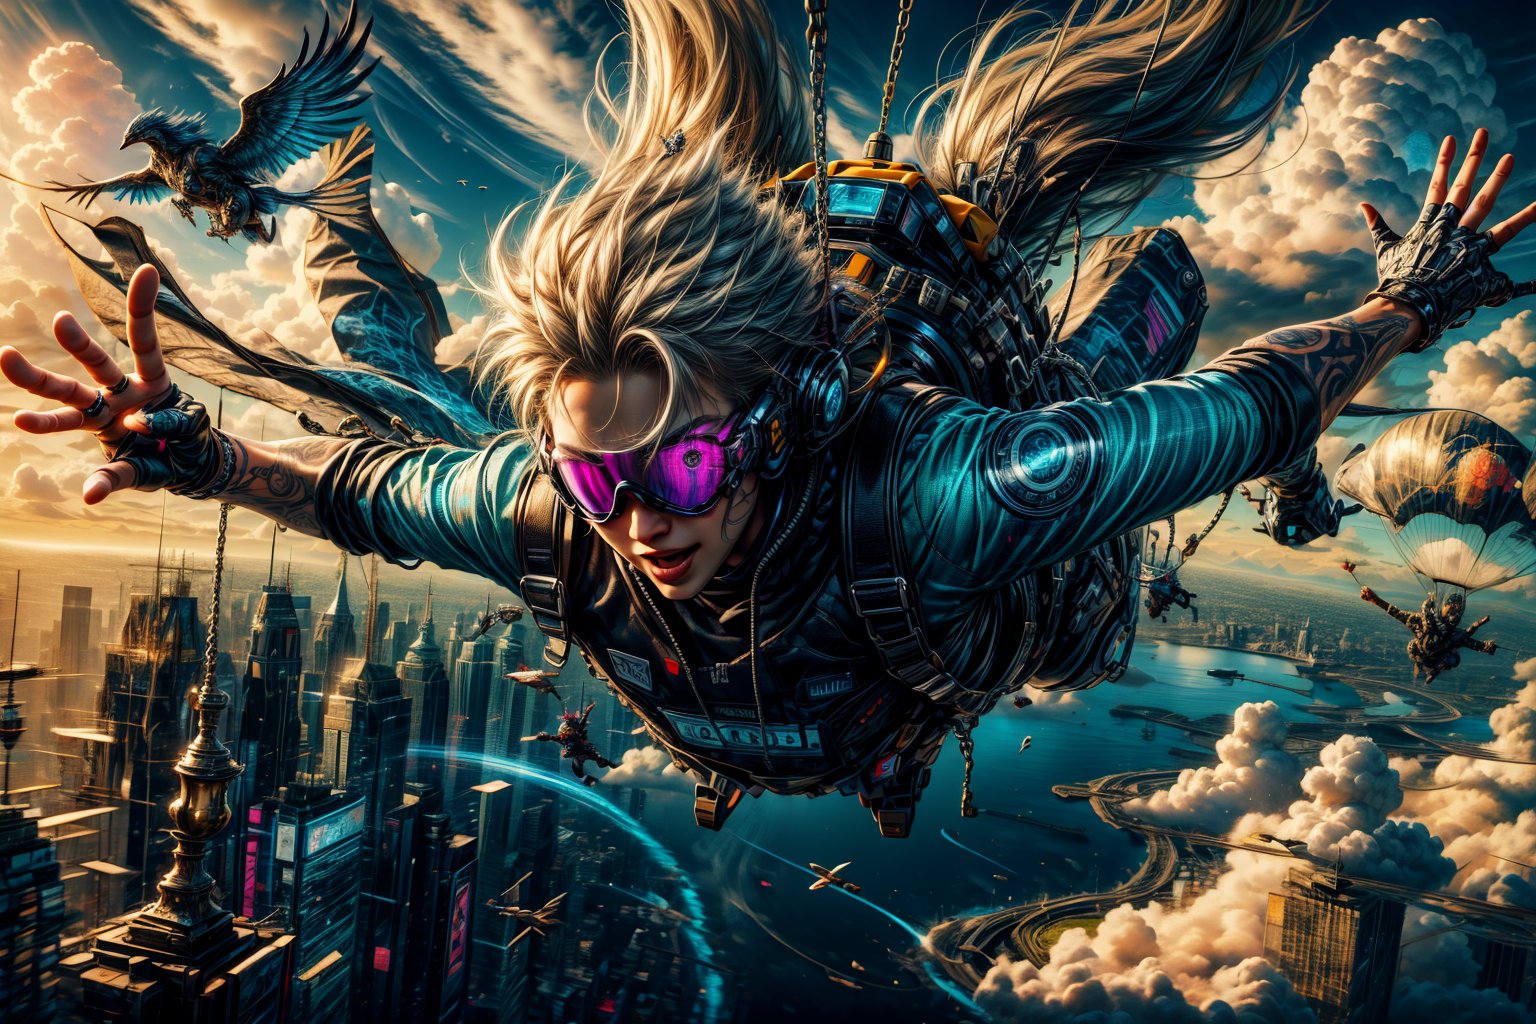 Create an image of a young man skydiving, captured mid-air with a joyful expression on his face. He is wearing a skydiving suit and protective goggles, with his hair slightly tousled by the wind. The background shows a breathtaking view of vast green fields and a body of water with a flower-shaped island below. The sky is clear and blue, enhancing the sense of thrill and freedom. The man should be in a dynamic pose, arms outstretched and legs bent, capturing the excitement of the skydive. (( 1 guy)), (Hands:1.1), ,better_hands,